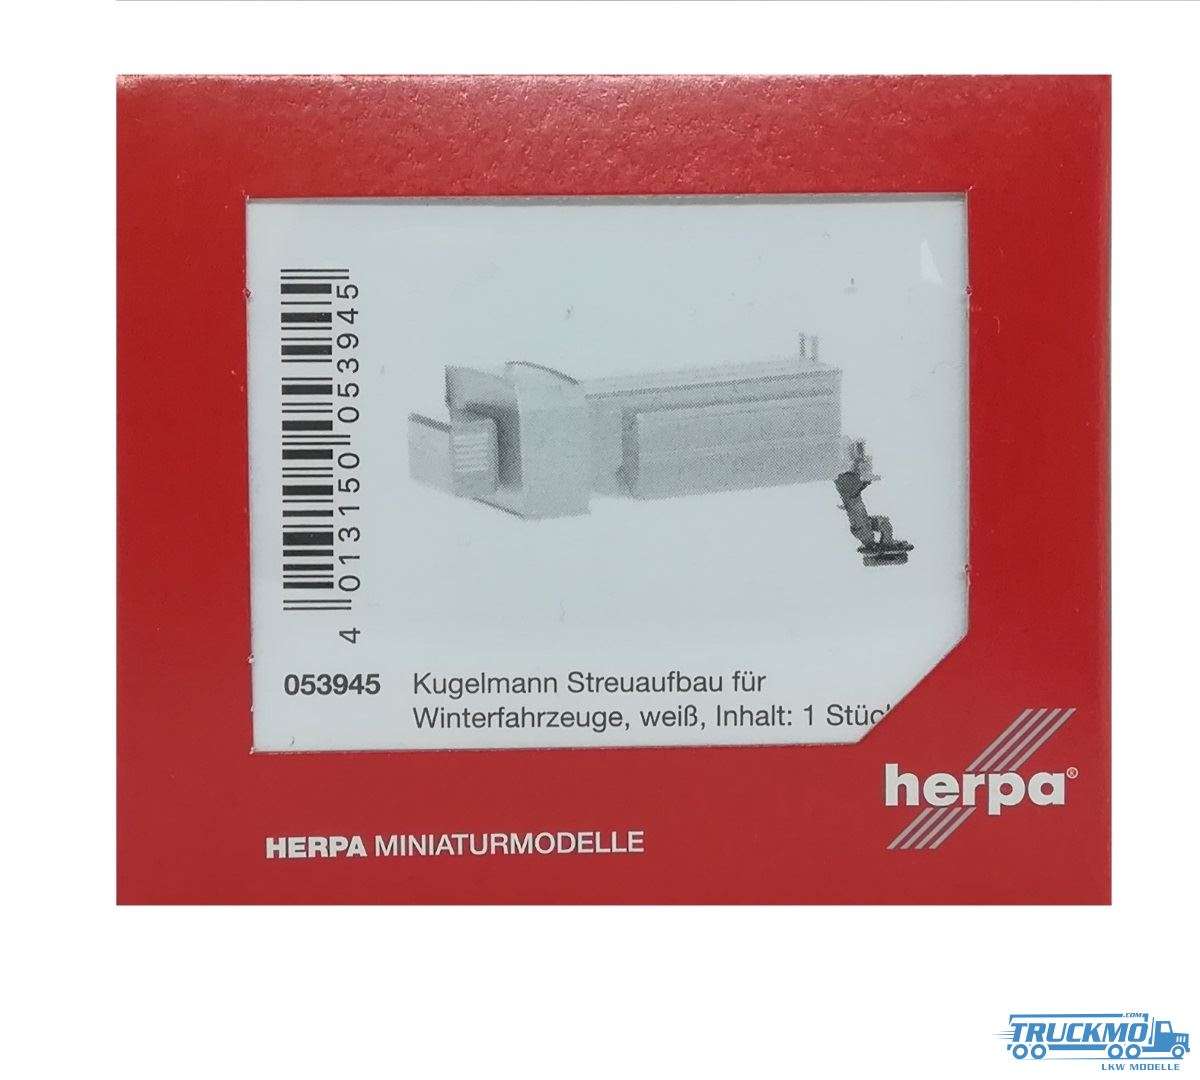 Herpa Kugelmann grit container for winter service vehicle white 053945